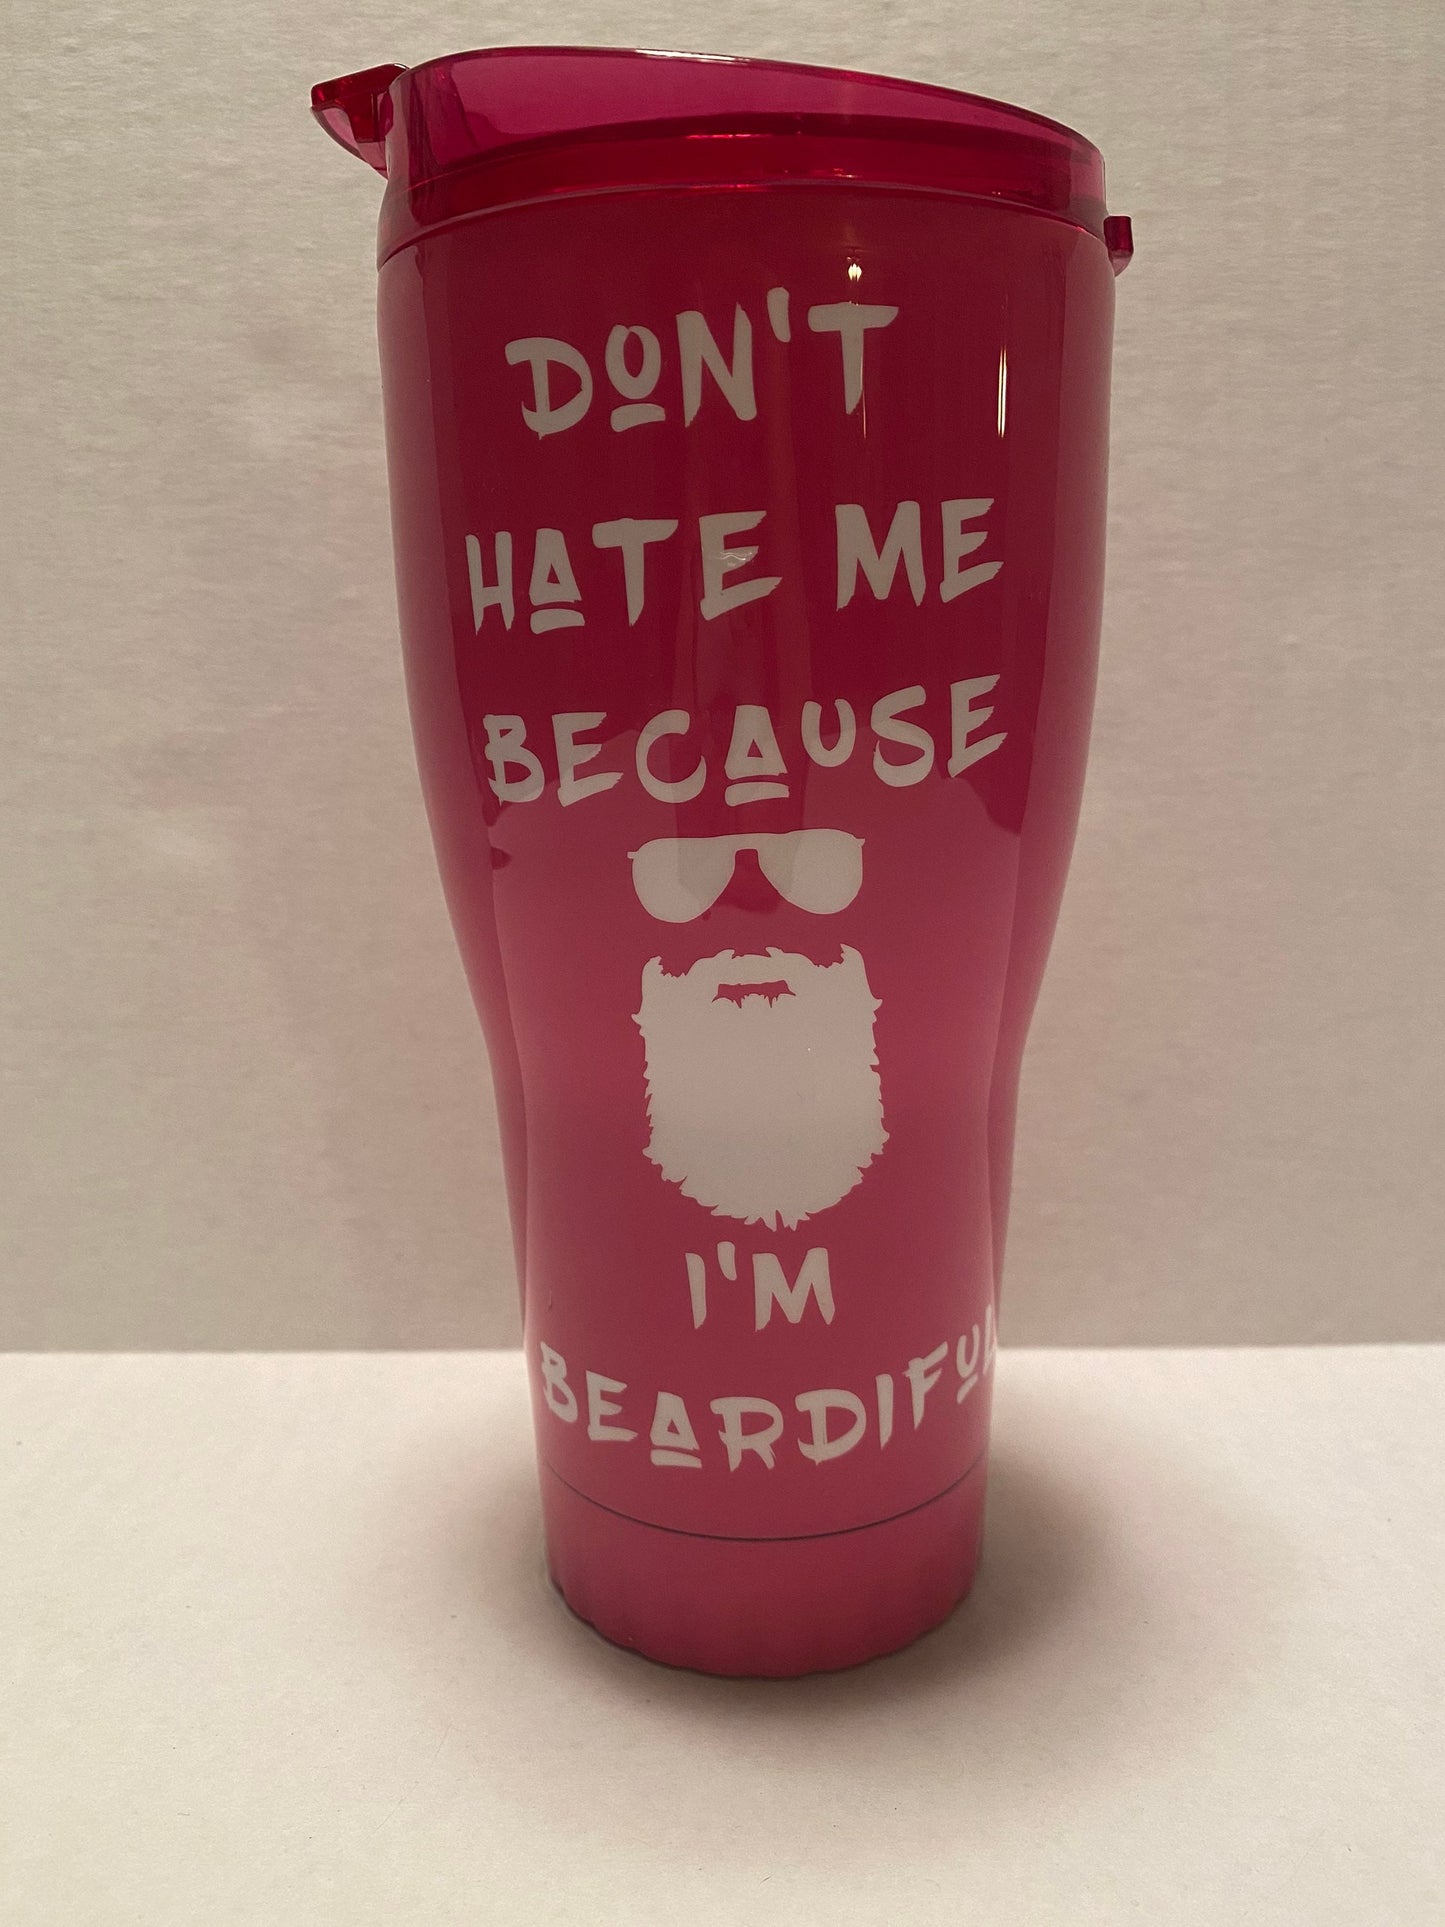 Beardiful/Don't hate me /Stainless Steel Tumbler/Funny coffee cup/funny coffee mug/funny tumbler/stainless steel coffee mug/20 oz/30 oz